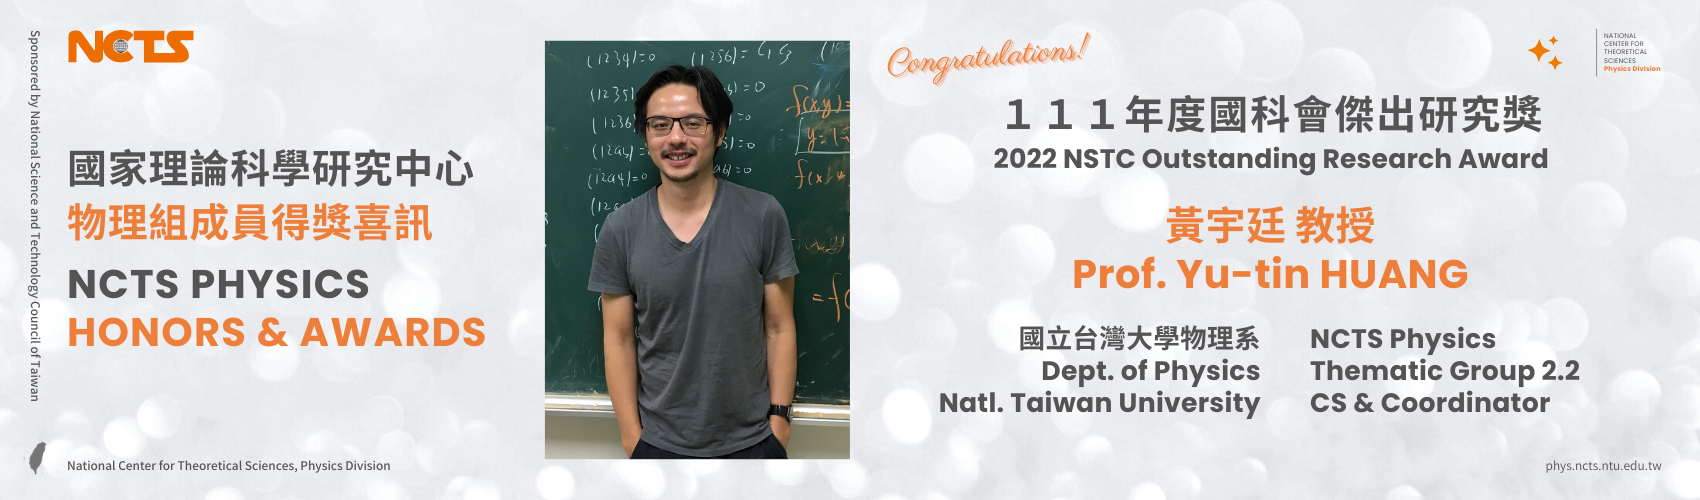 NCTS Congratulates Prof. Yu-tin Huang on Winning 2022 NSTC Outstanding Research Award